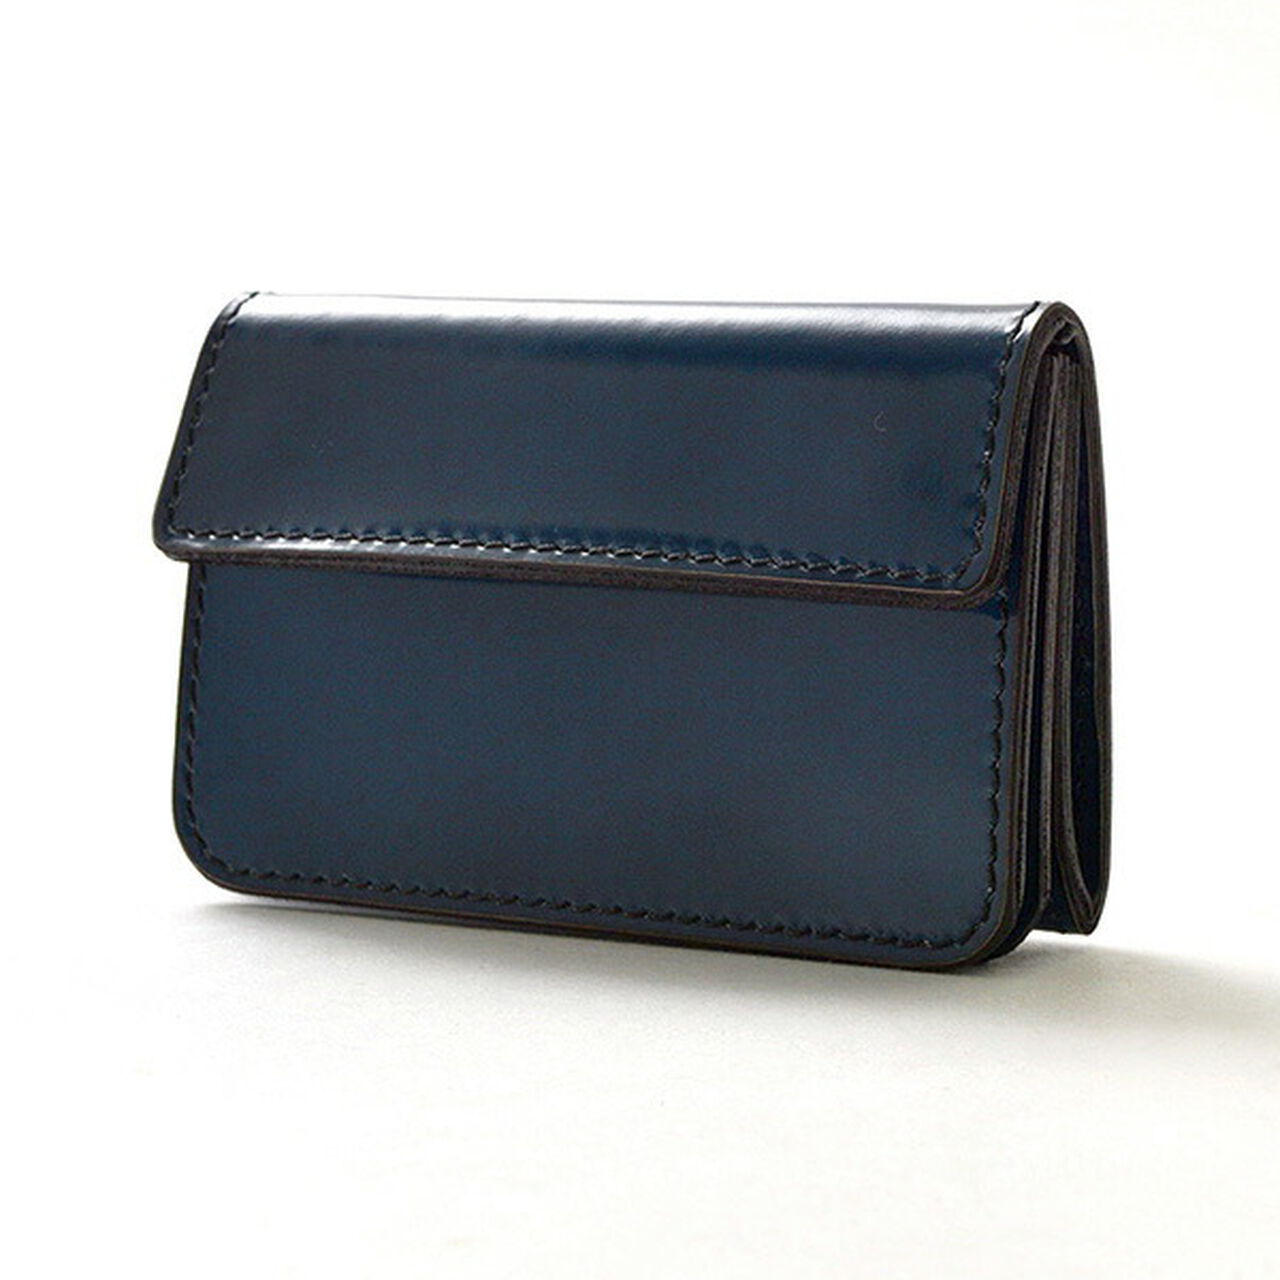 Bellows Compact Wallet,Black, large image number 0